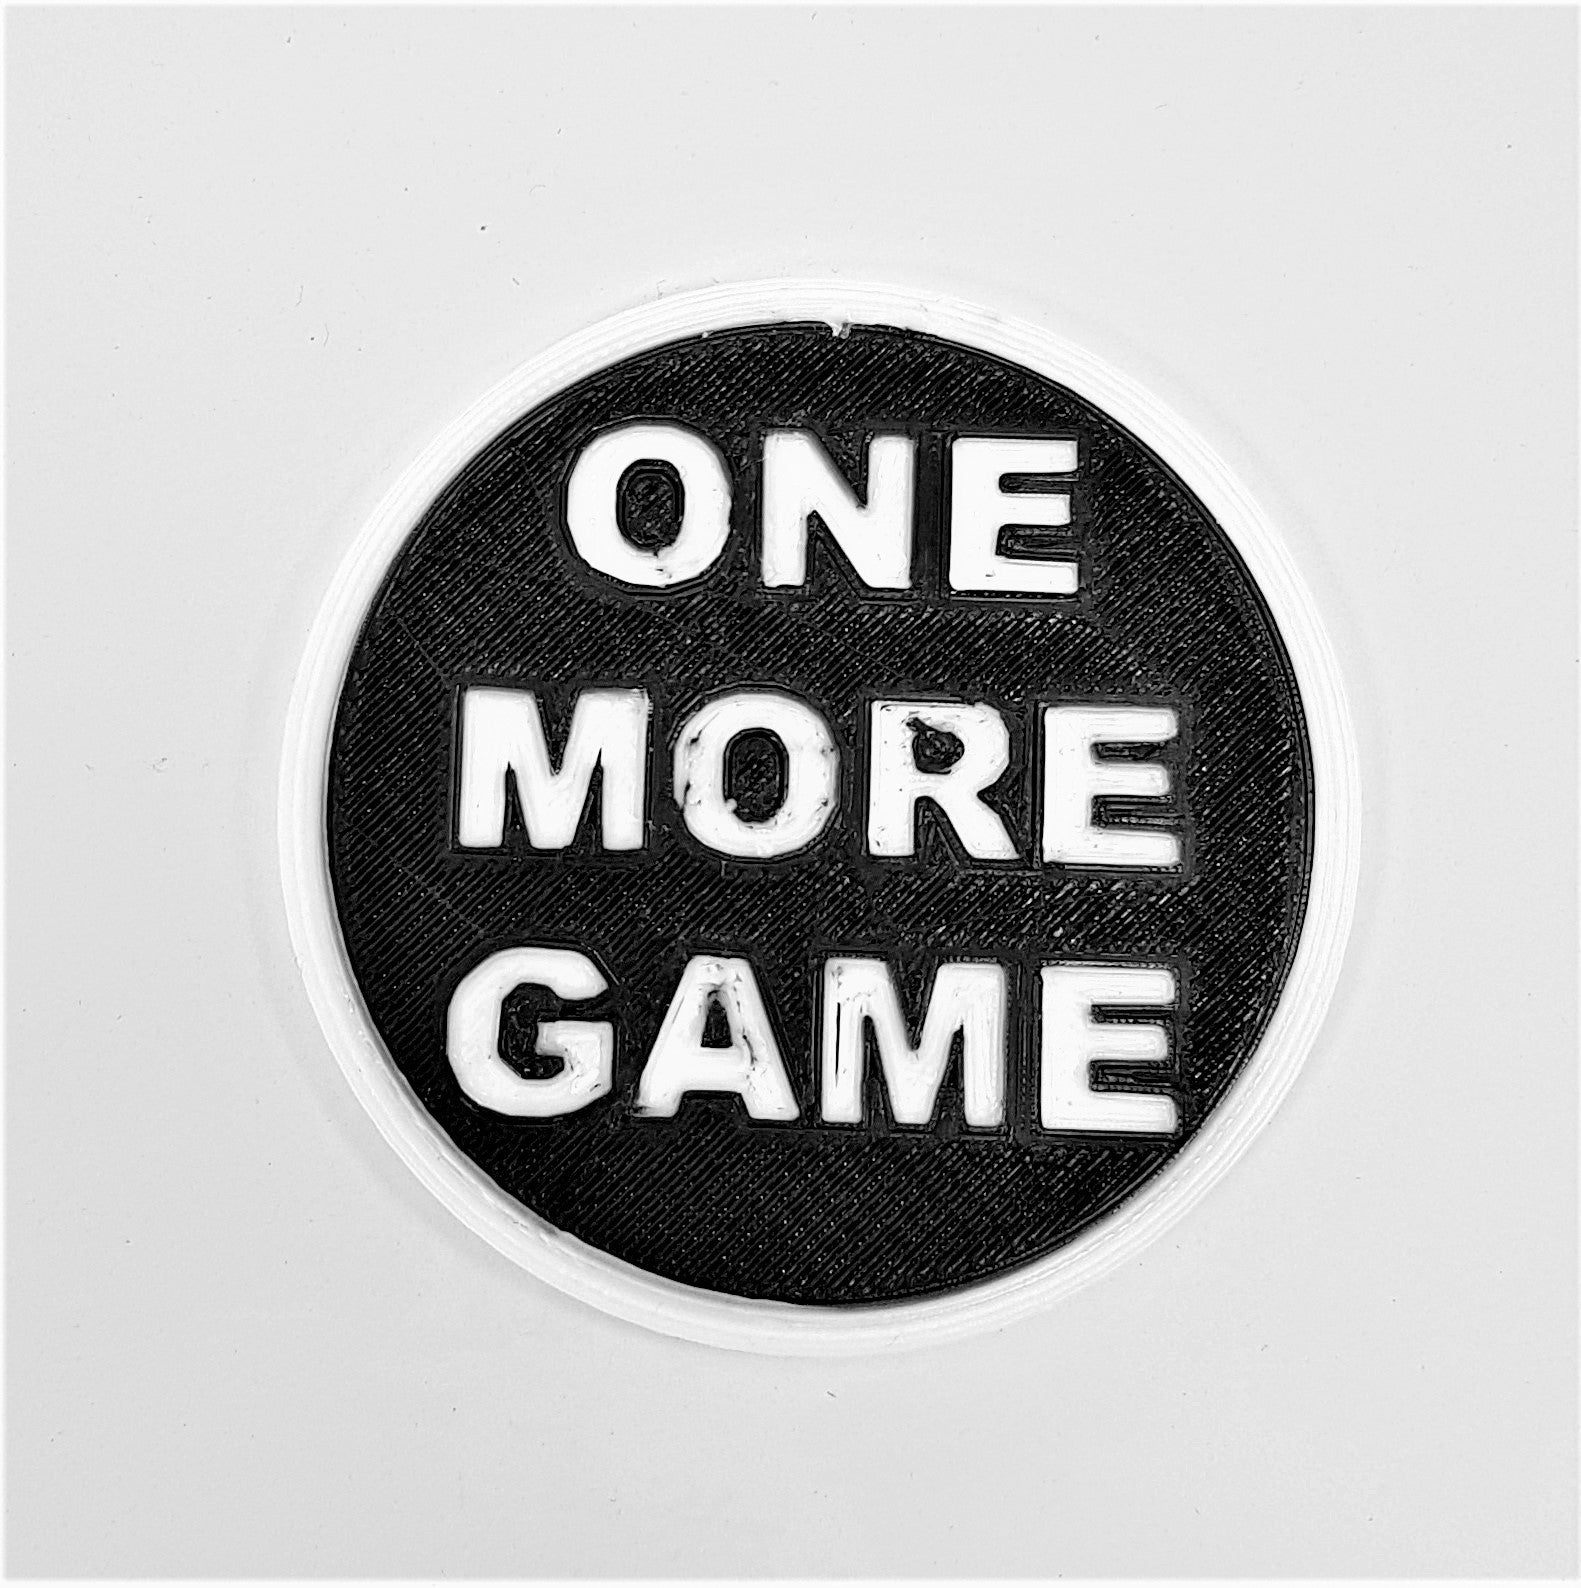 Gaming "Choice" Coaster / Large Coin: Flip The Coin To Decide If You Play On Or Rest Up..!